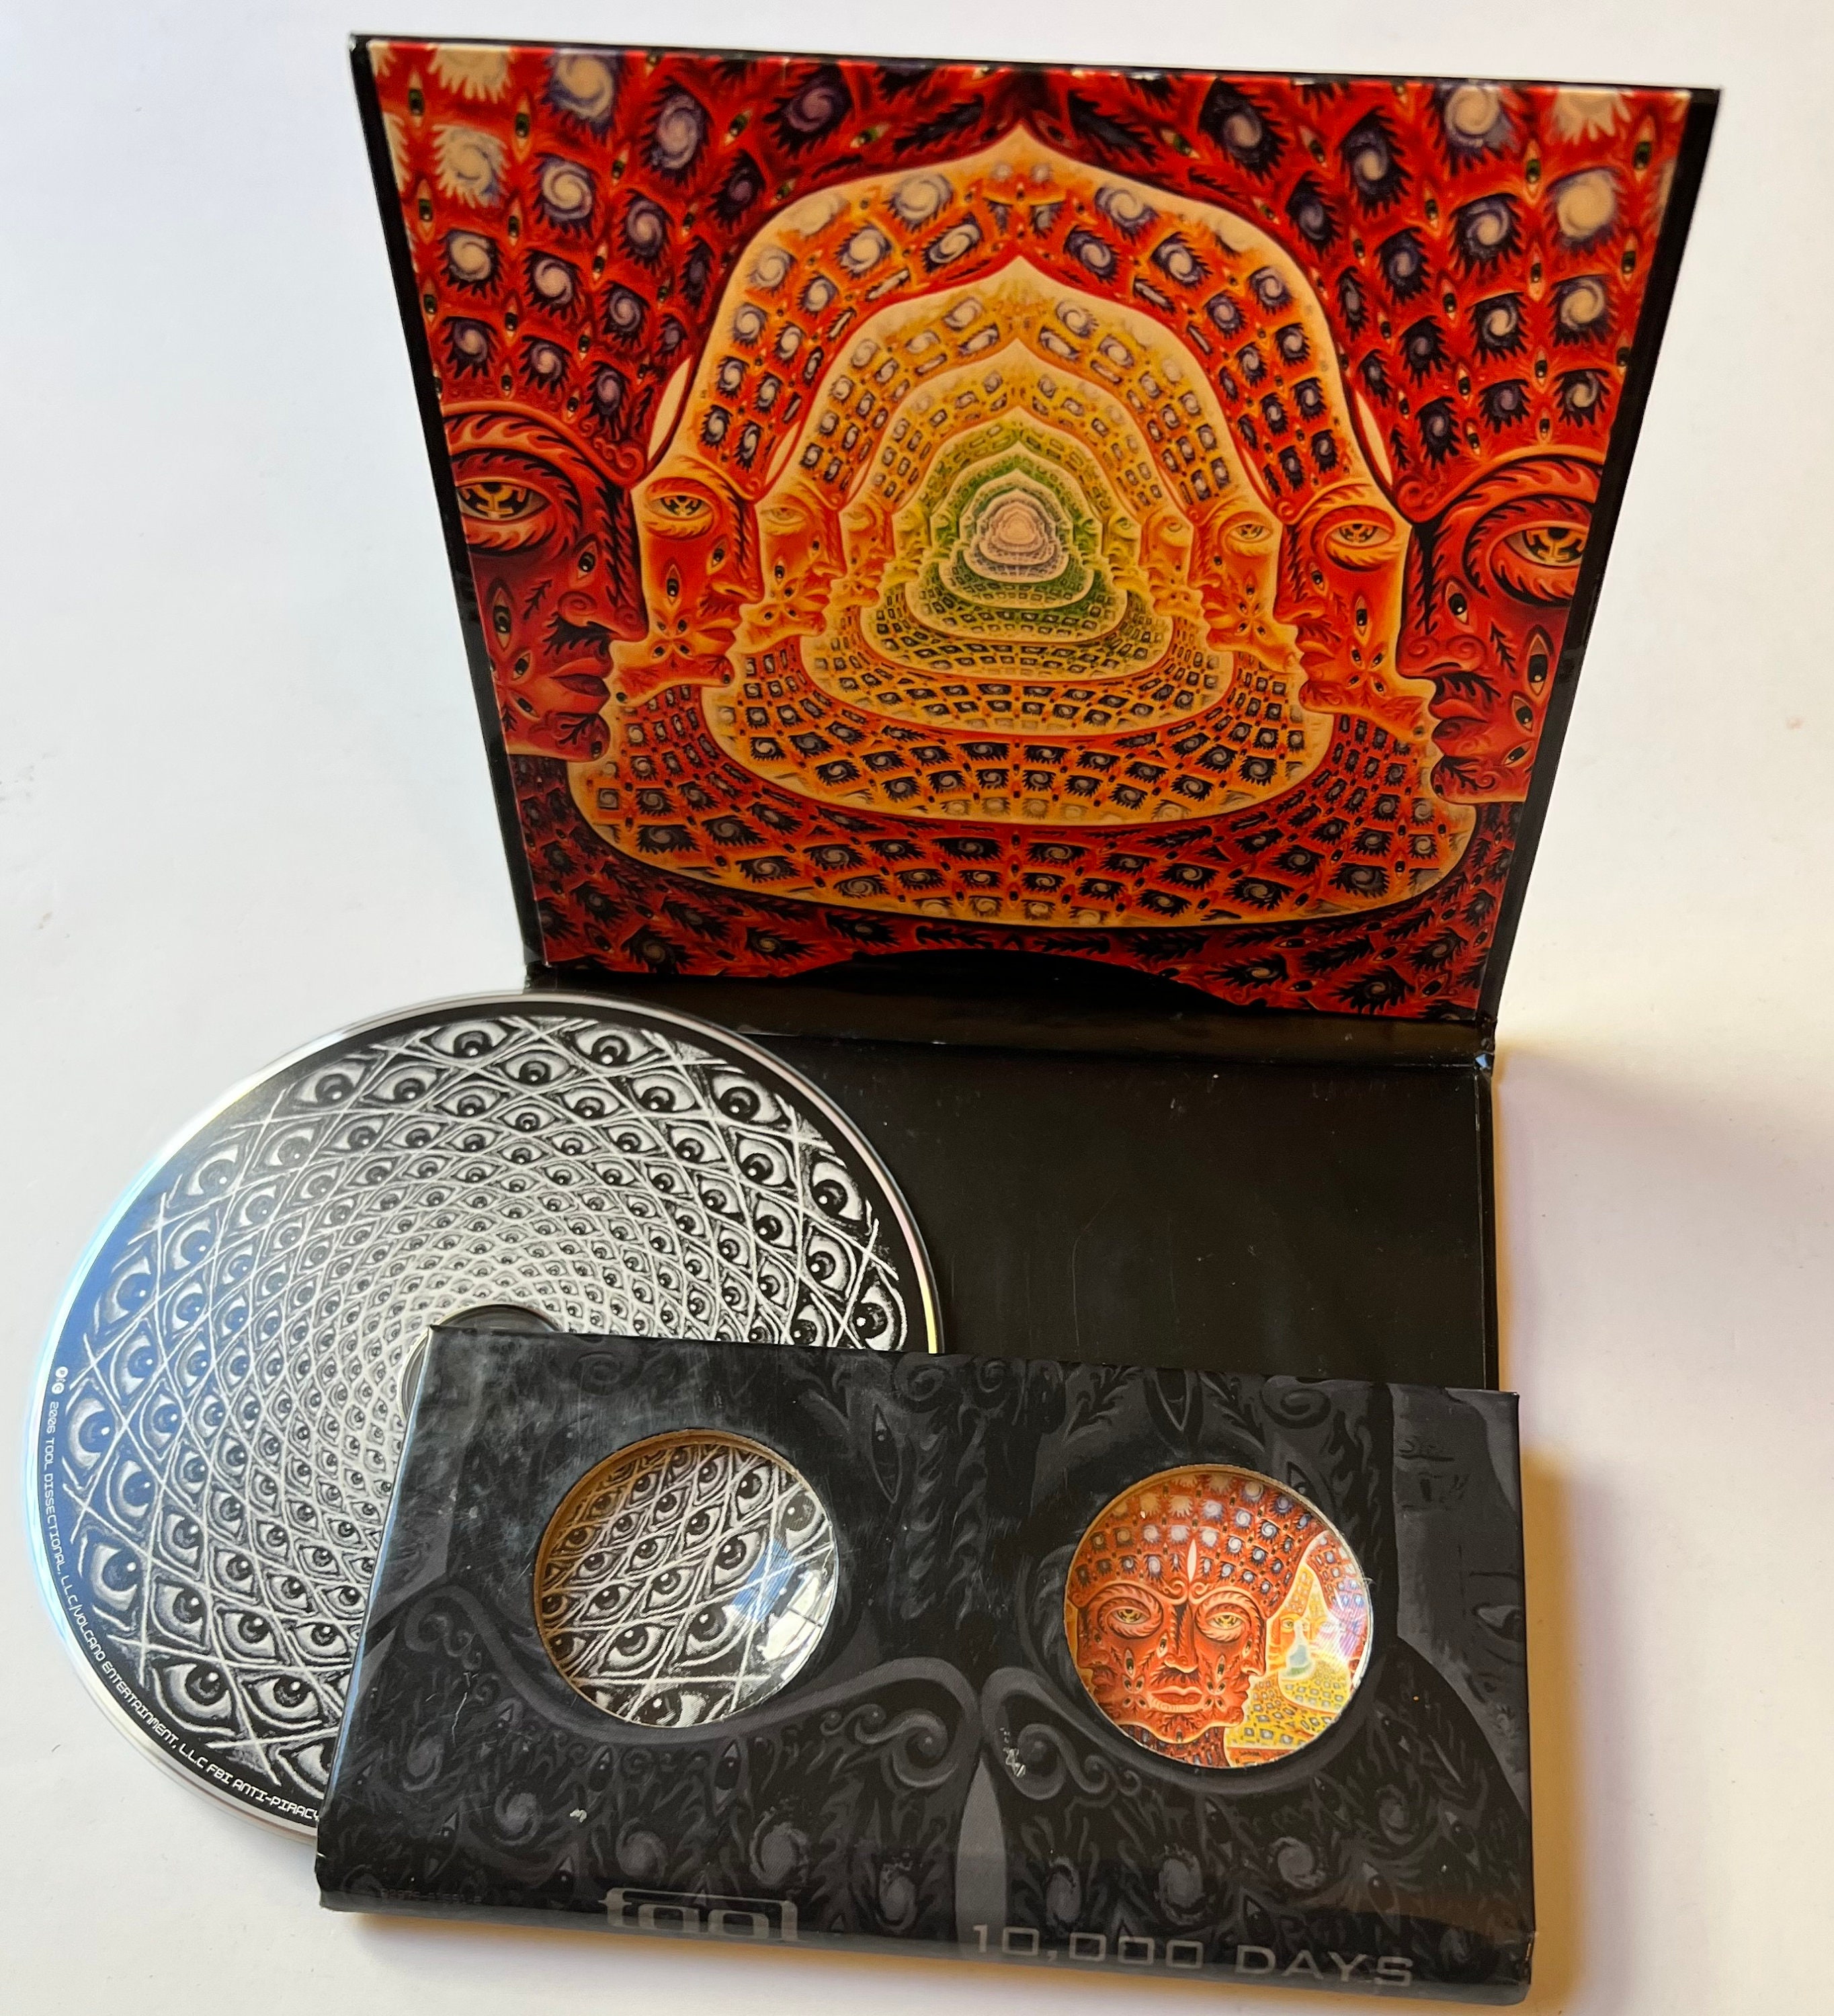 TOOL 10,000 Days CD With Stereoscopic Glasses 